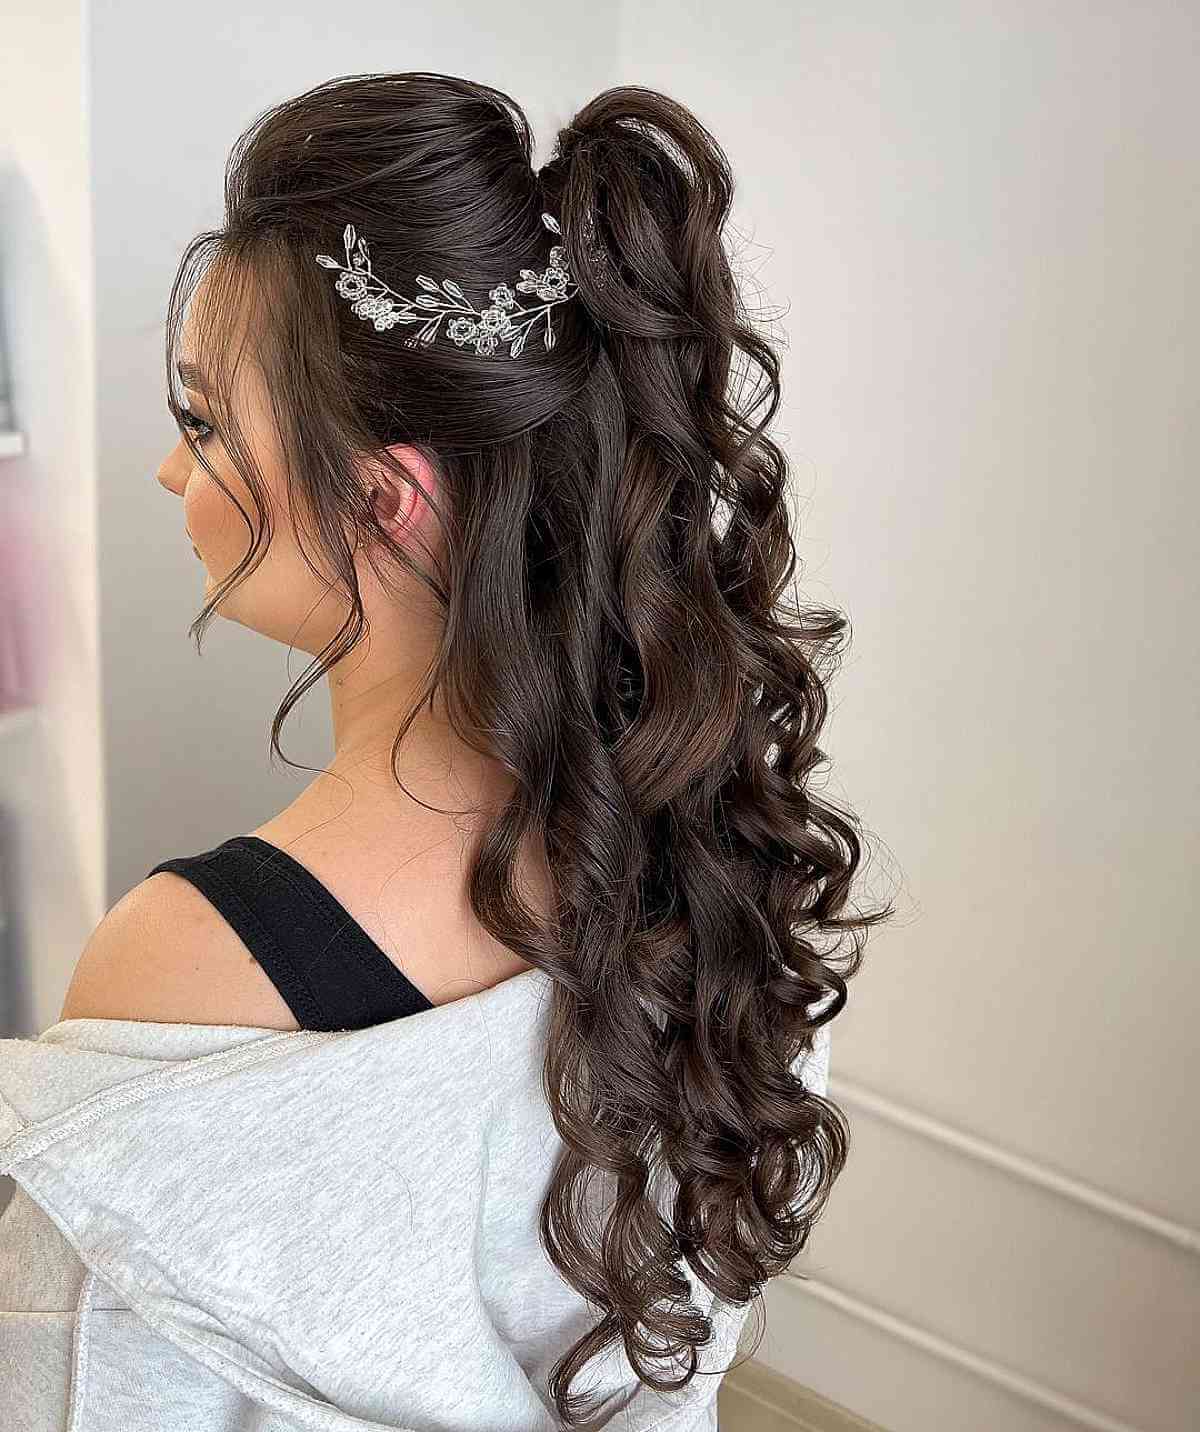 Half Open Hairstyle